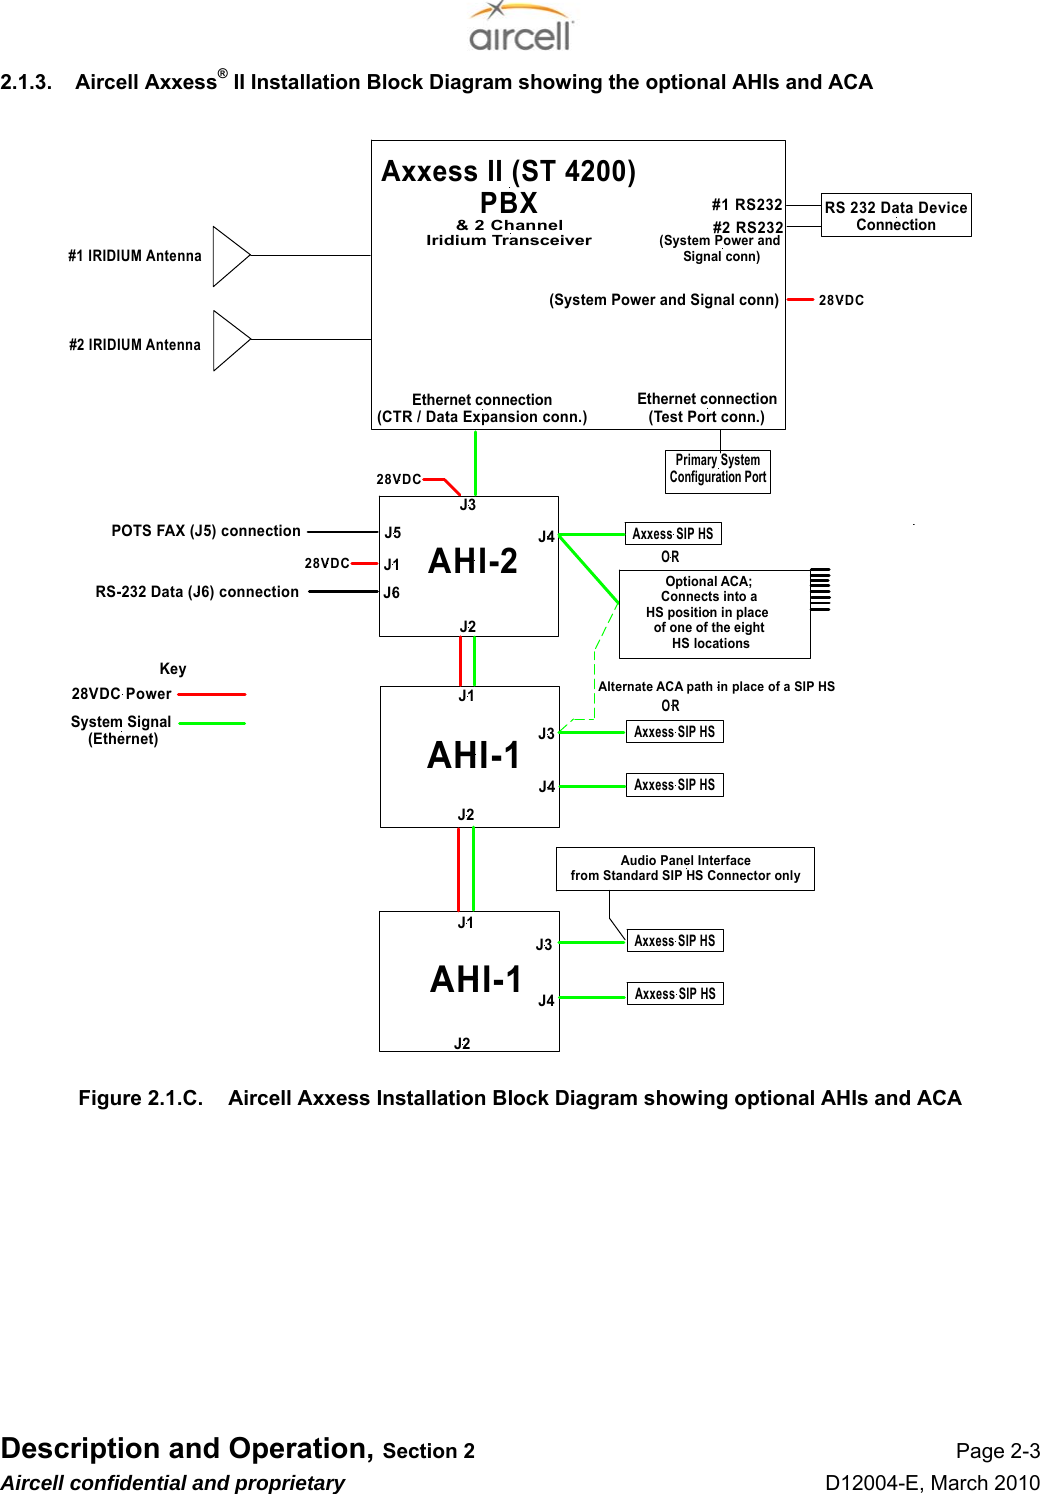  Description and Operation, Section 2 Page 2-3 Aircell confidential and proprietary D12004-E, March 2010 2.1.3.  Aircell Axxess® II Installation Block Diagram showing the optional AHIs and ACA Axxess II (ST 4200)PBX#1 IRIDIUM Antenna#2 IRIDIUM Antenna&amp; 2 ChannelIridium TransceiverEthernet connection(Test Port conn.)Audio Panel Interfacefrom Standard SIP HS Connector onlyPrimary SystemConfiguration PortRS 232 Data DeviceConnectionEthernet connection(CTR / Data Expansion conn.)Axxess SIP HSAxxess SIP HSAxxess SIP HSAxxess SIP HS#2 RS232#1 RS23228VDCAHI-1Axxess SIP HS28VDCPOTS FAX (J5) connection(System Power and Signal conn)Alternate ACA path in place of a SIP HS(System Power and Signal conn)AHI-1AHI-2RS-232 Data (J6) connection28VDCJ5J6J1ORKey28VDC PowerSystem Signal (Ethernet)J1J1J2J2J4J3J4J3J4J3J2Optional ACA;Connects into aHS position in place of one of the eight HS locationsOR Figure 2.1.C.  Aircell Axxess Installation Block Diagram showing optional AHIs and ACA           